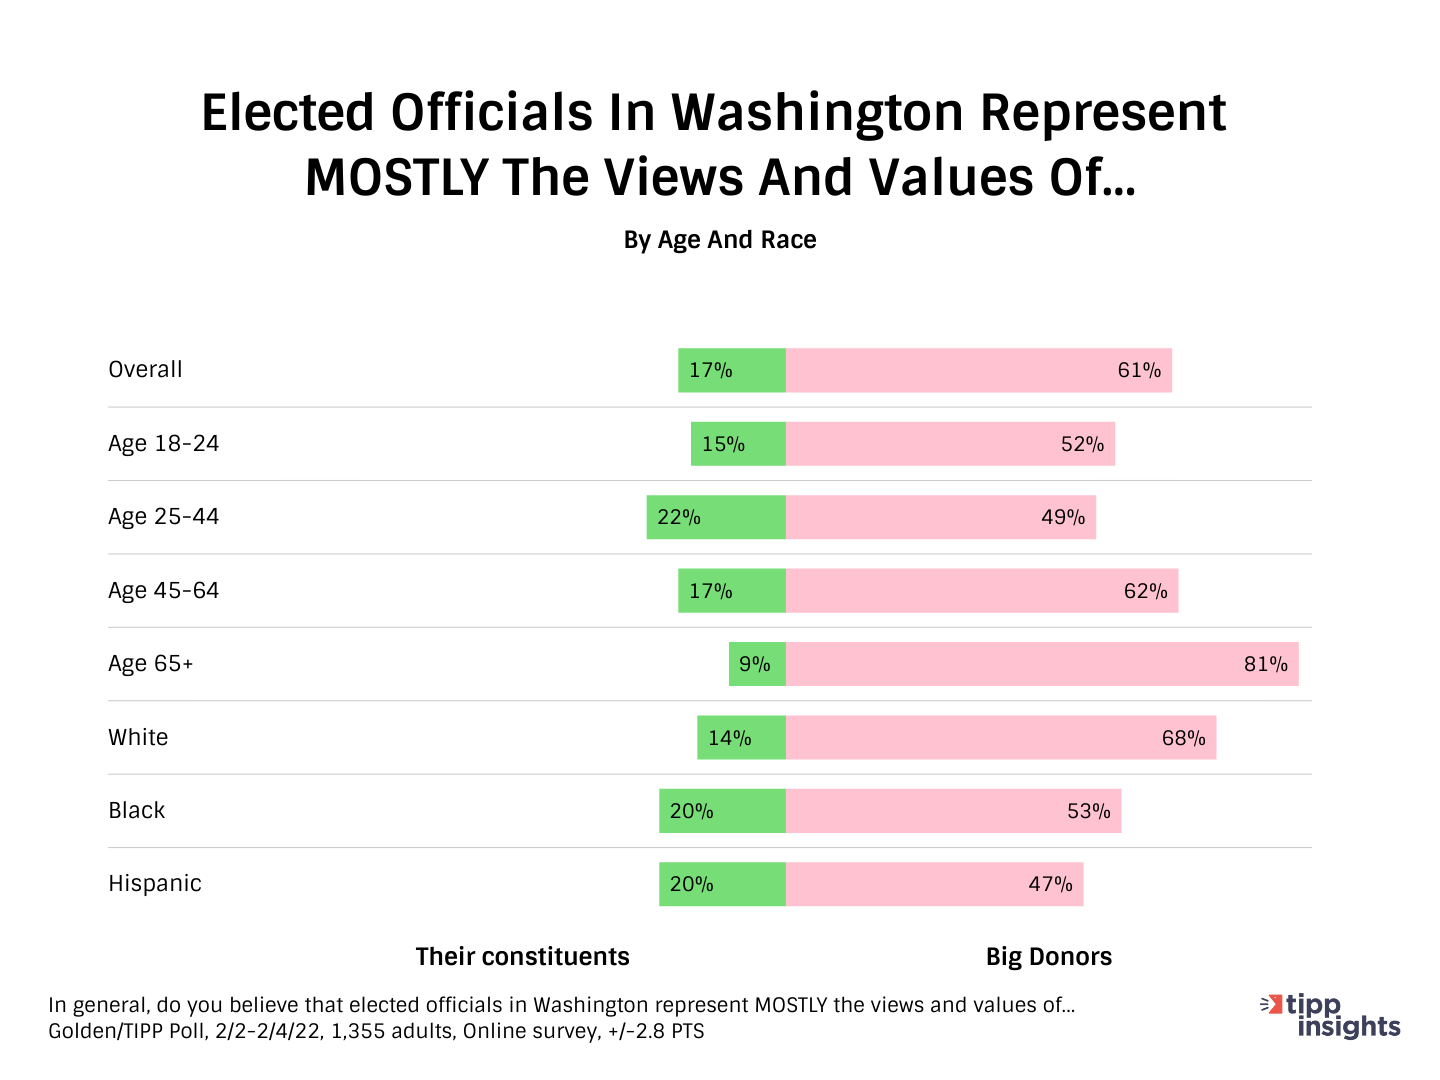 Elected officials in Washington represent mostly the views and values of...